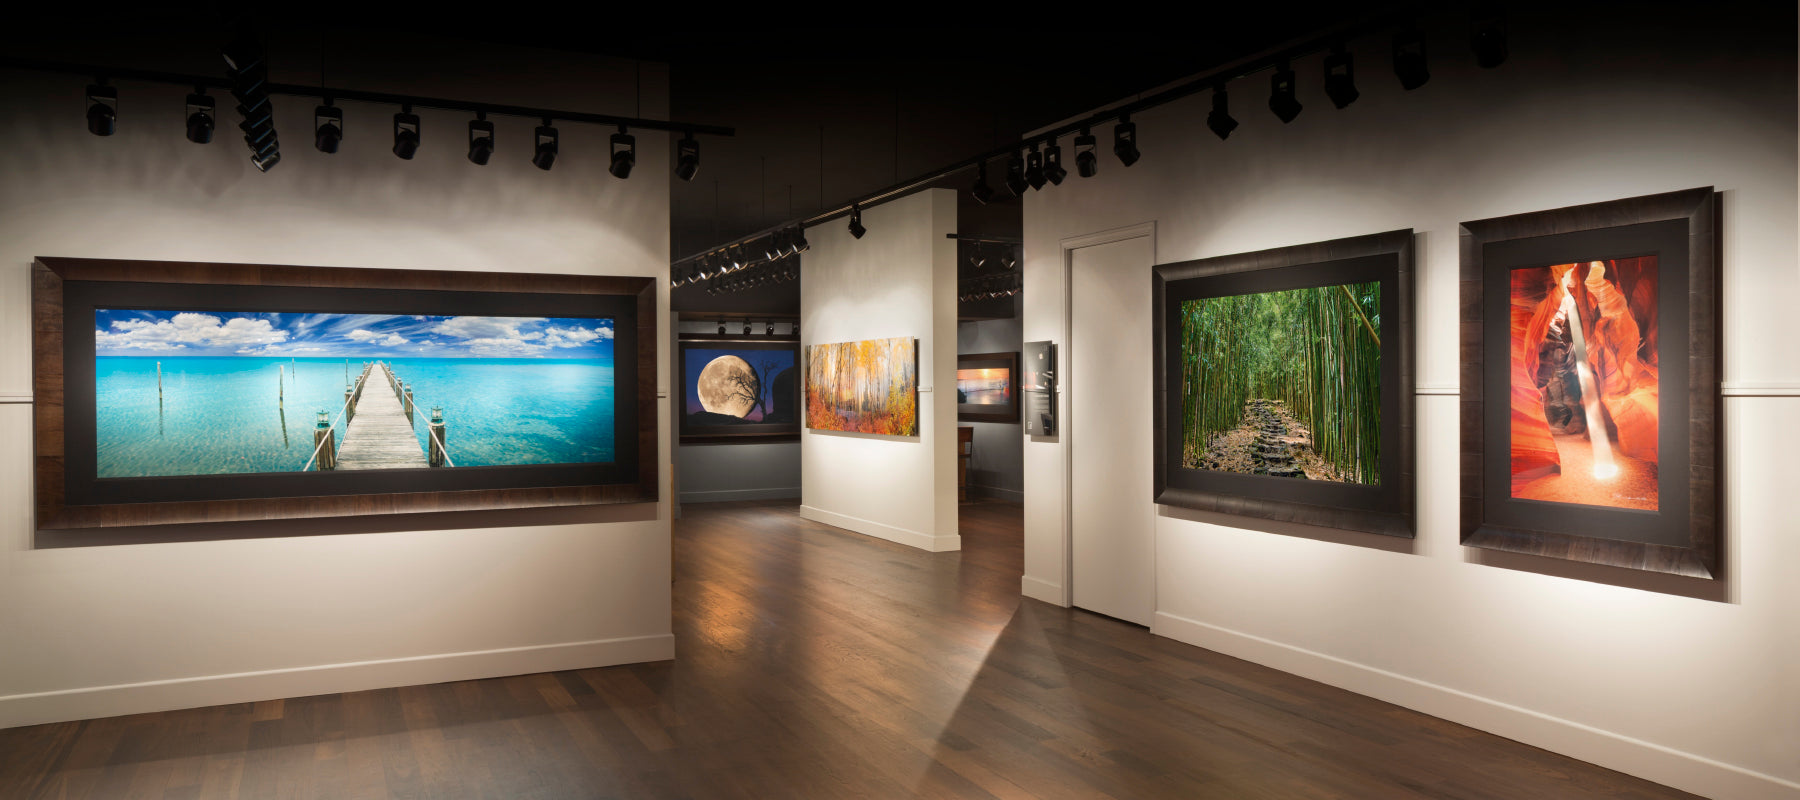 LIK Fine Art Gallery interior with white and gray walls and brown wood floors displaying framed photography by Peter Lik